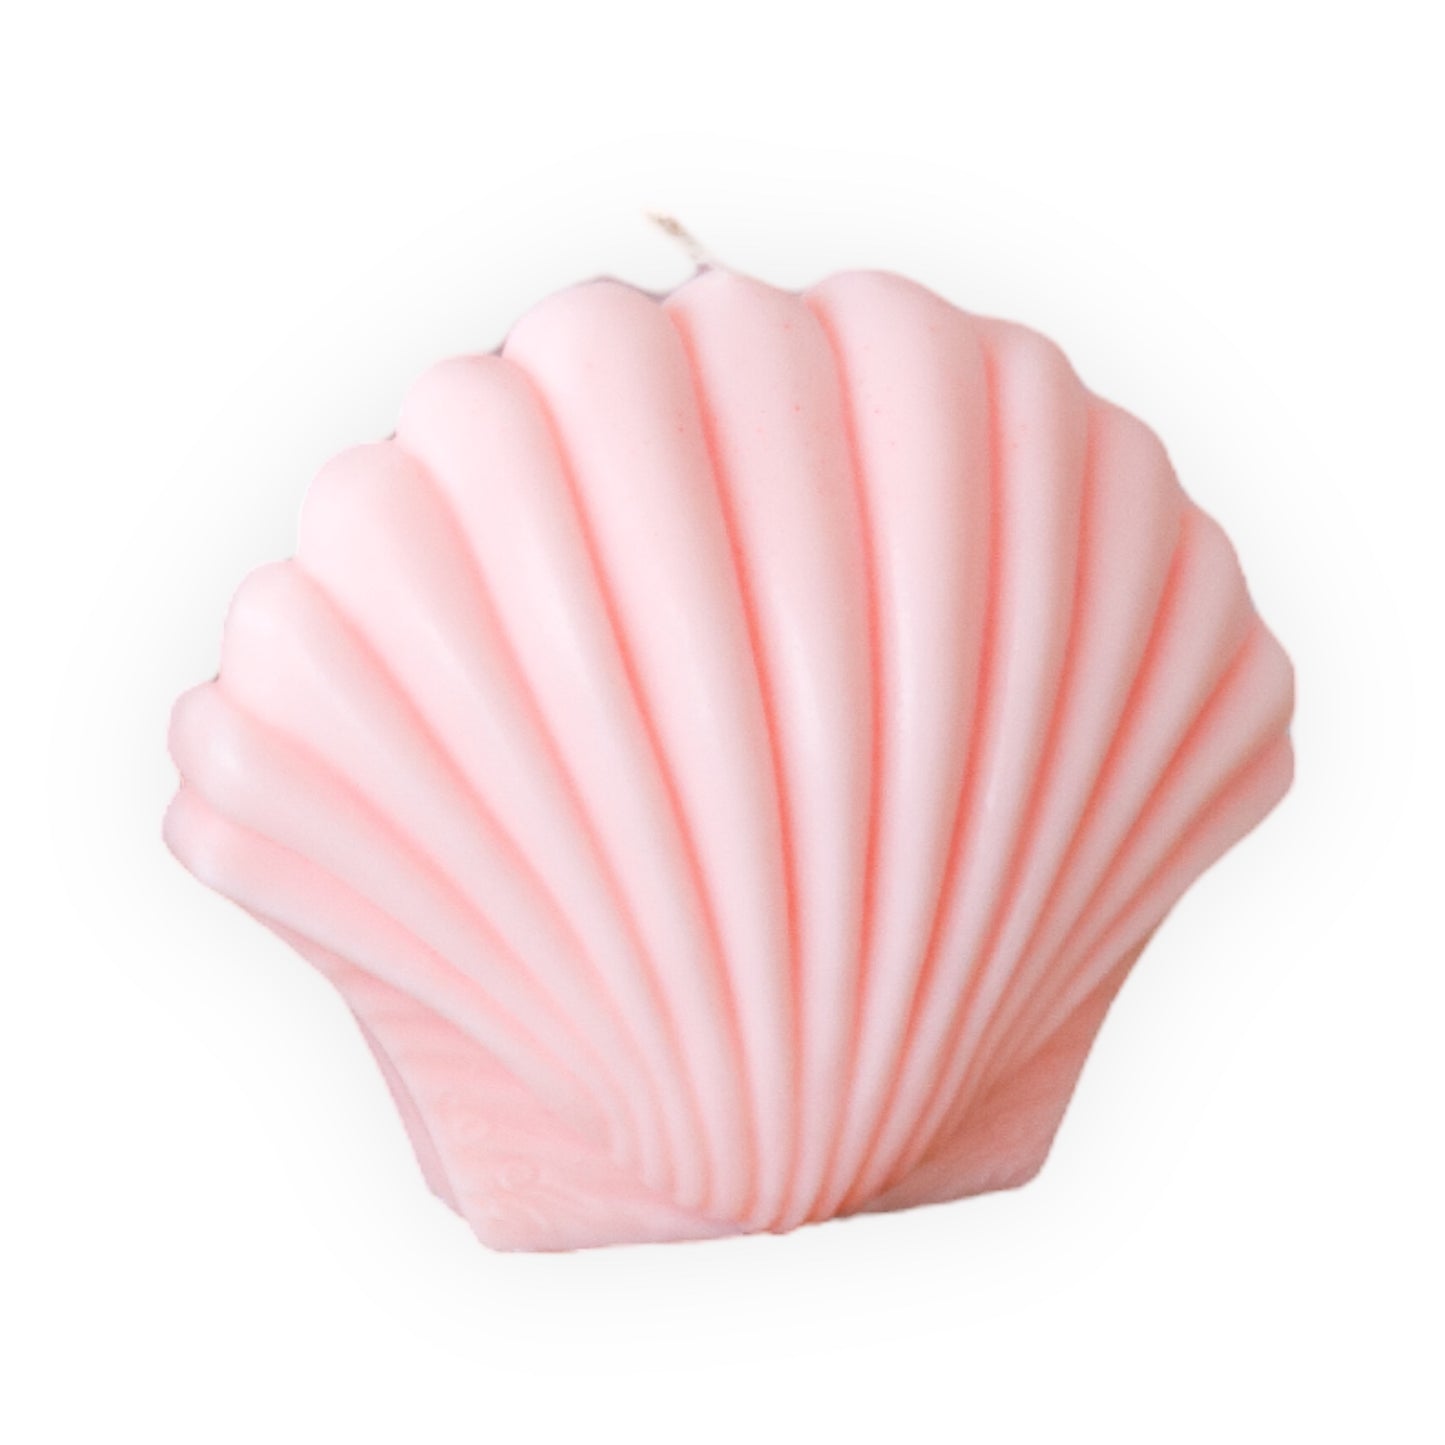 Shell Candle Scented